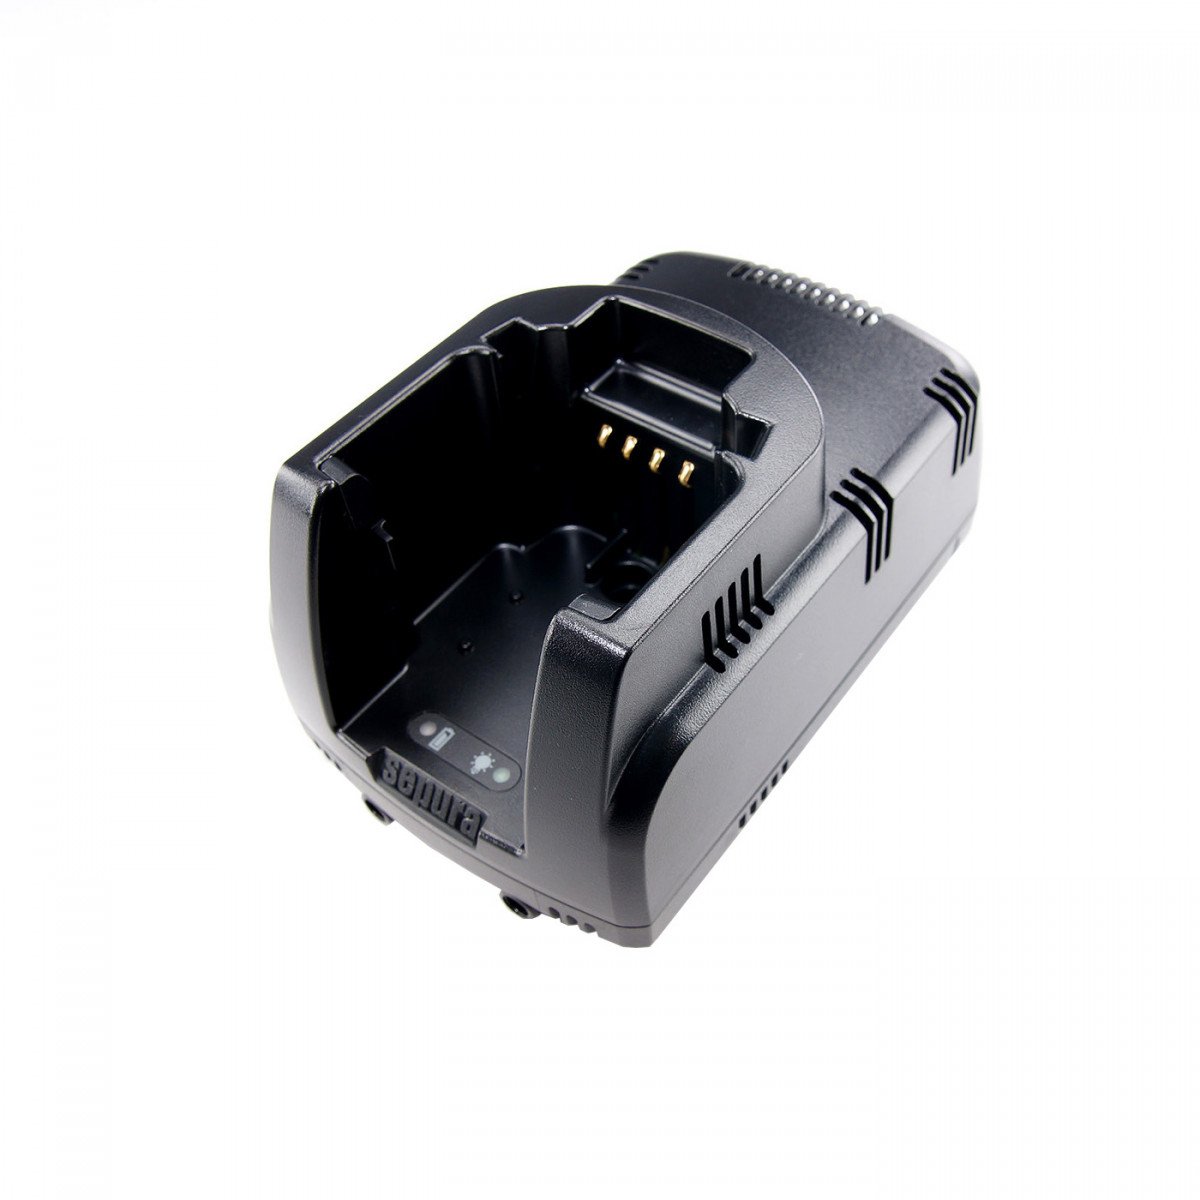 SEPURA single charger, 230V, for device with battery or single battery for Sepura STP8X 41800518